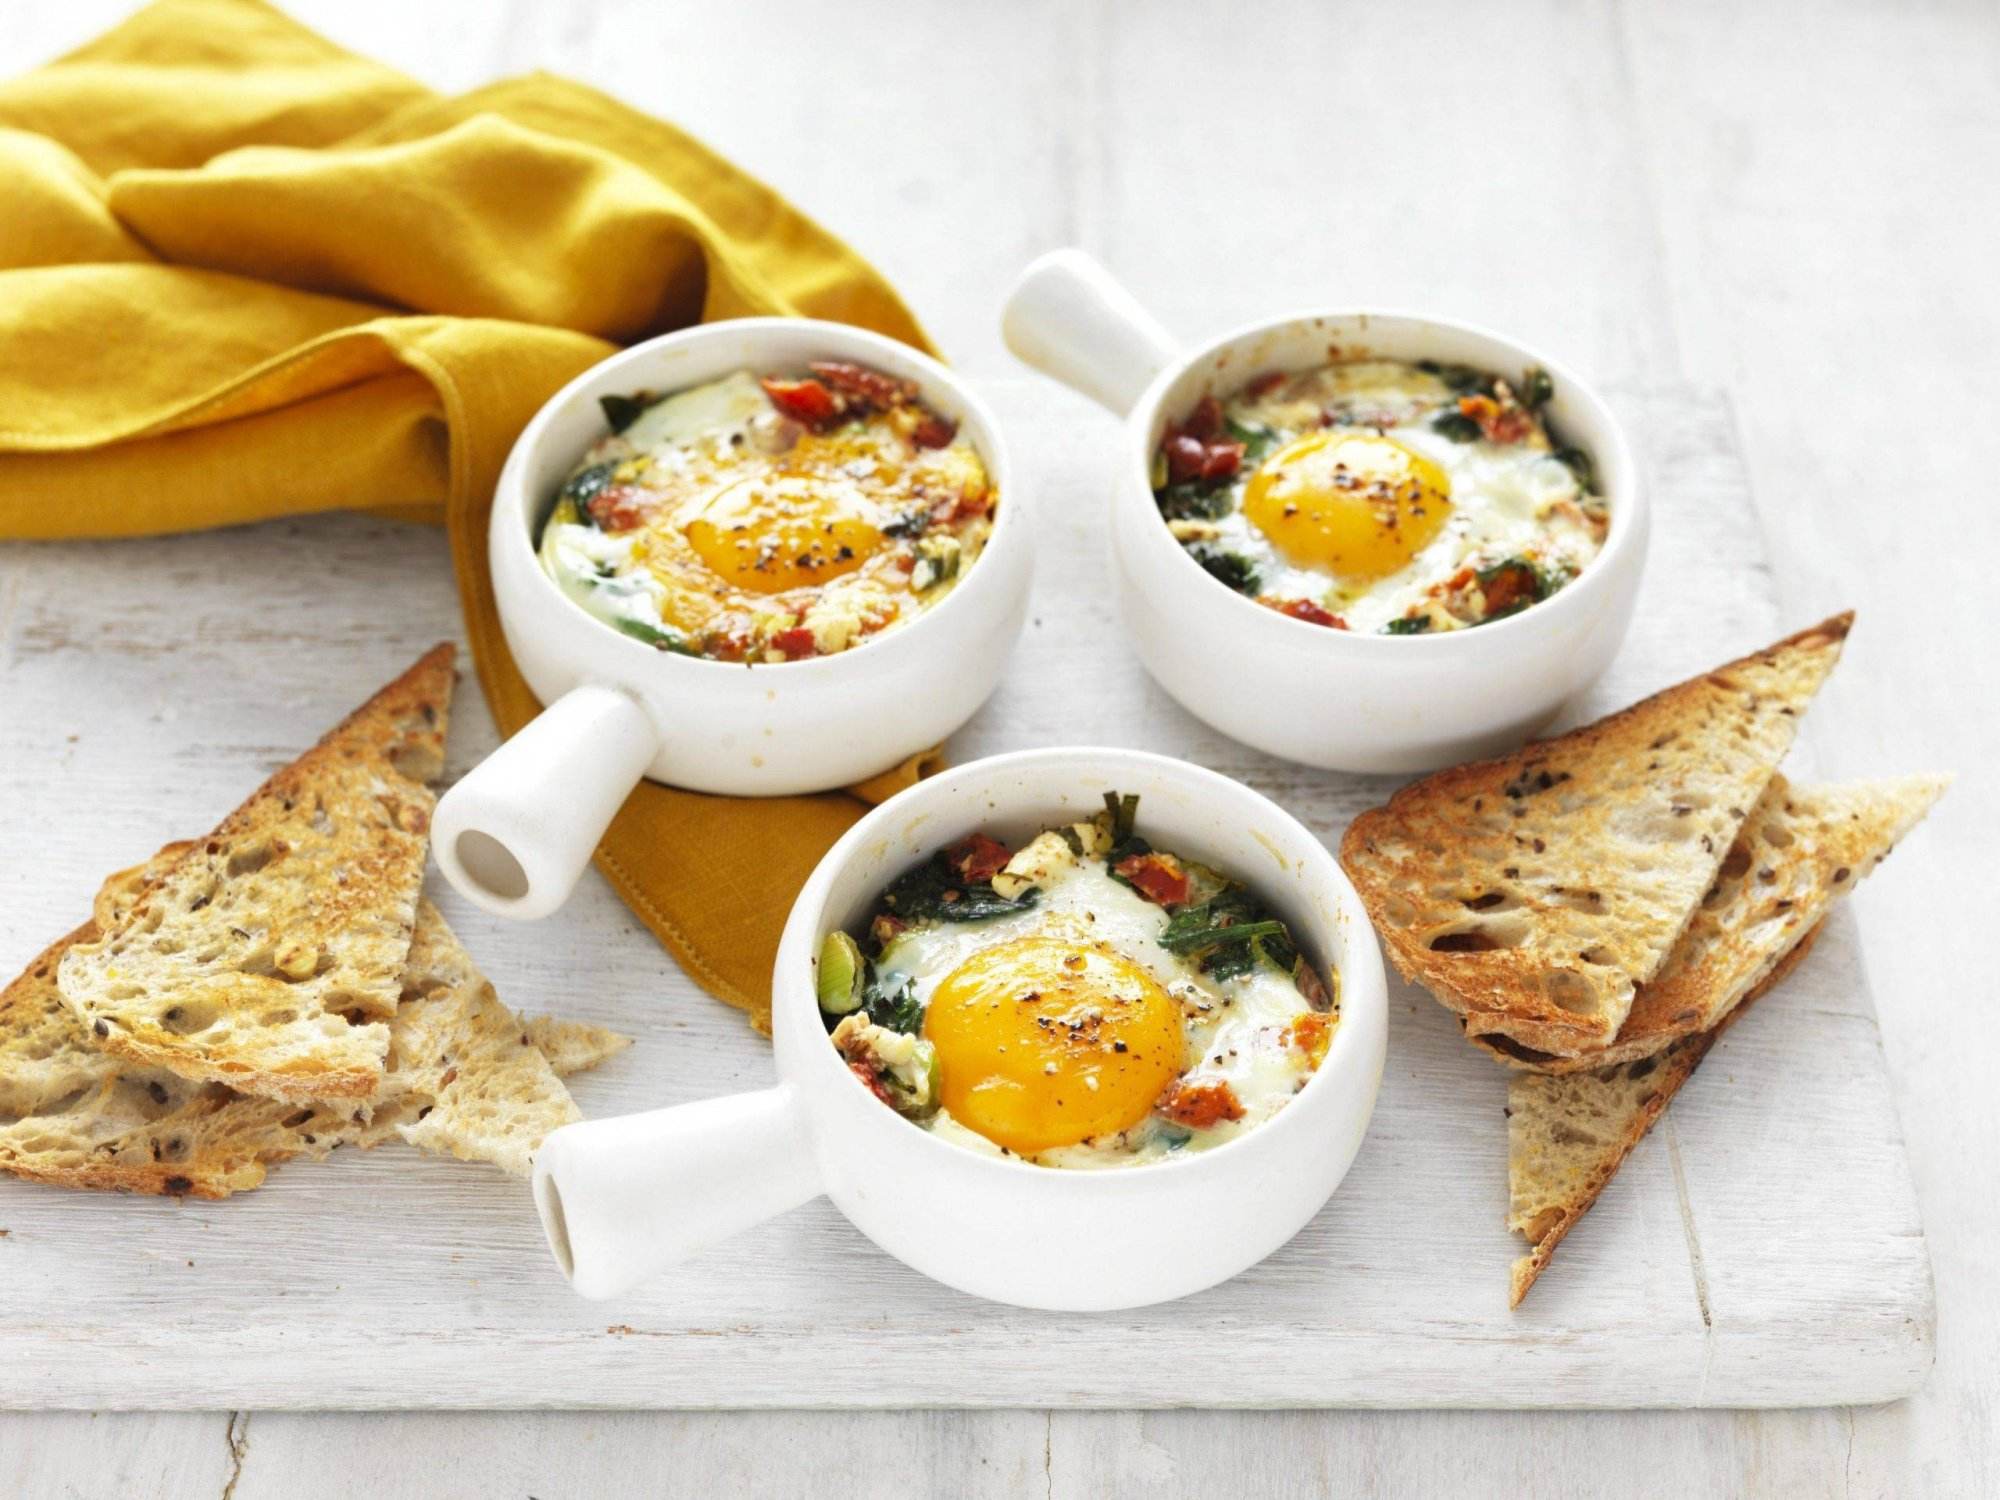 Baked Eggs with Spinach and Feta